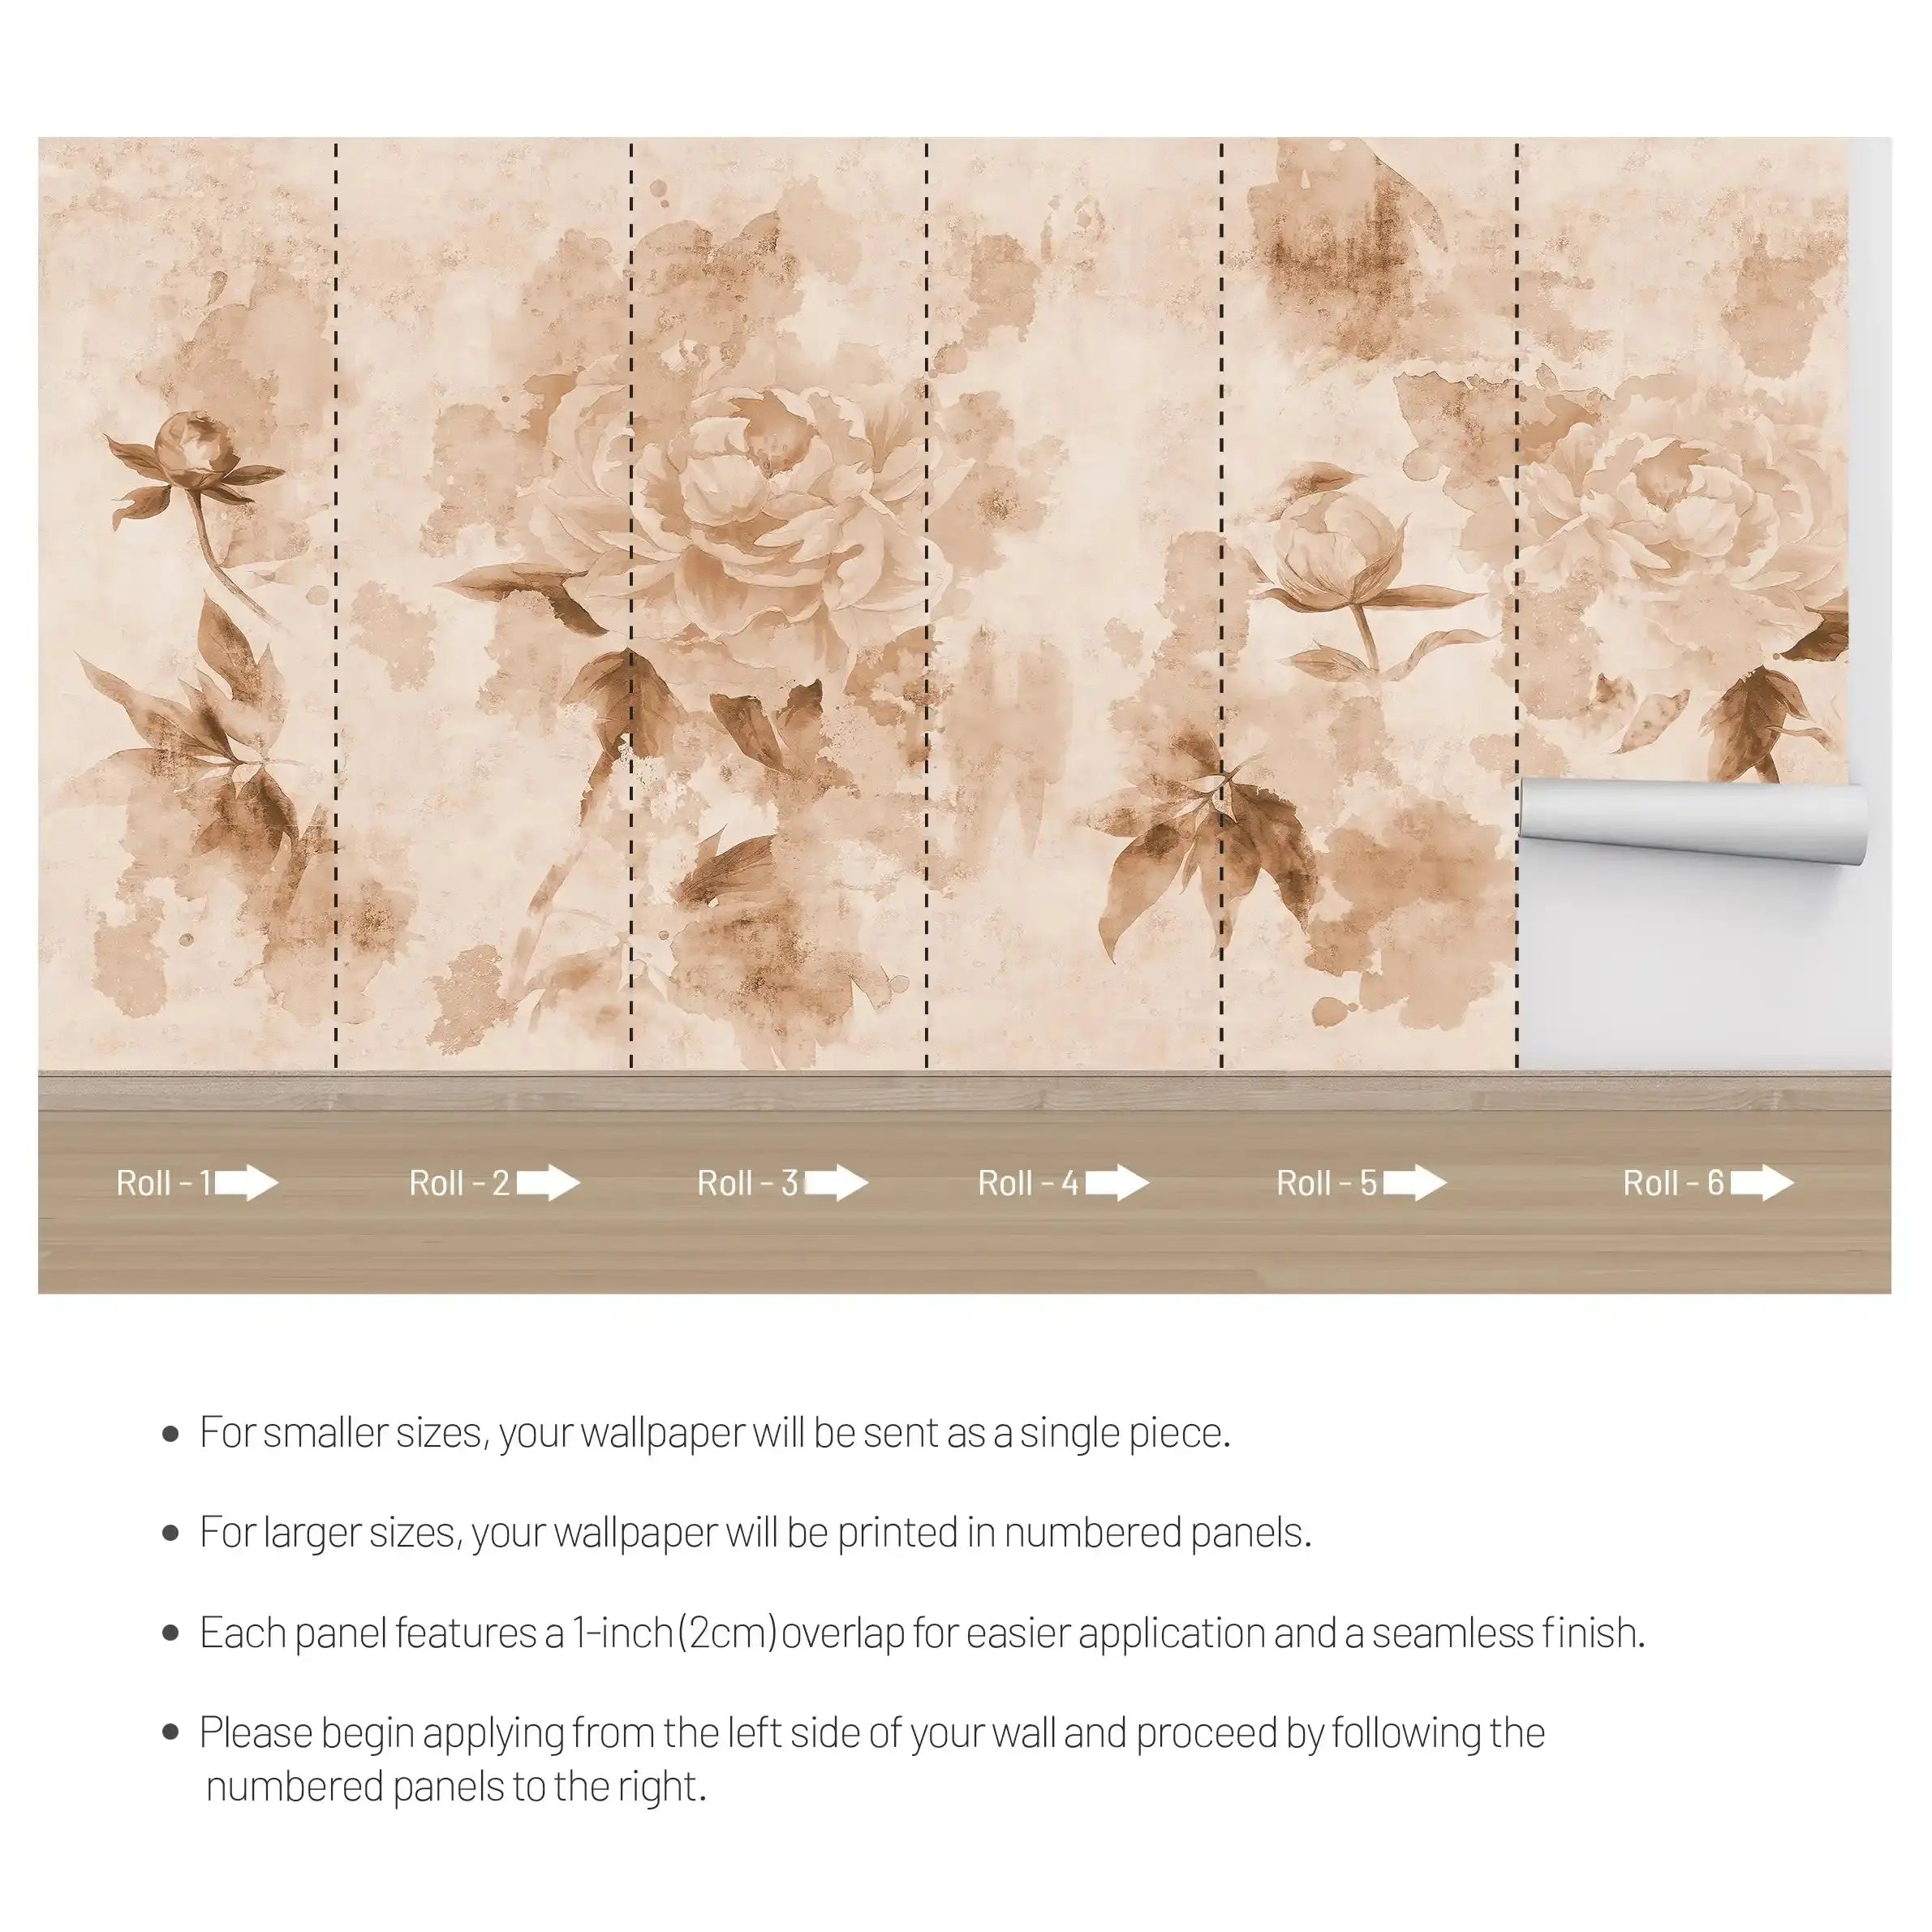 3004-D / Watercolor Floral Peel and Stick Wallpaper - Peony Design for Modern Room Decor, Perfect for Bedroom and Bathroom - Artevella